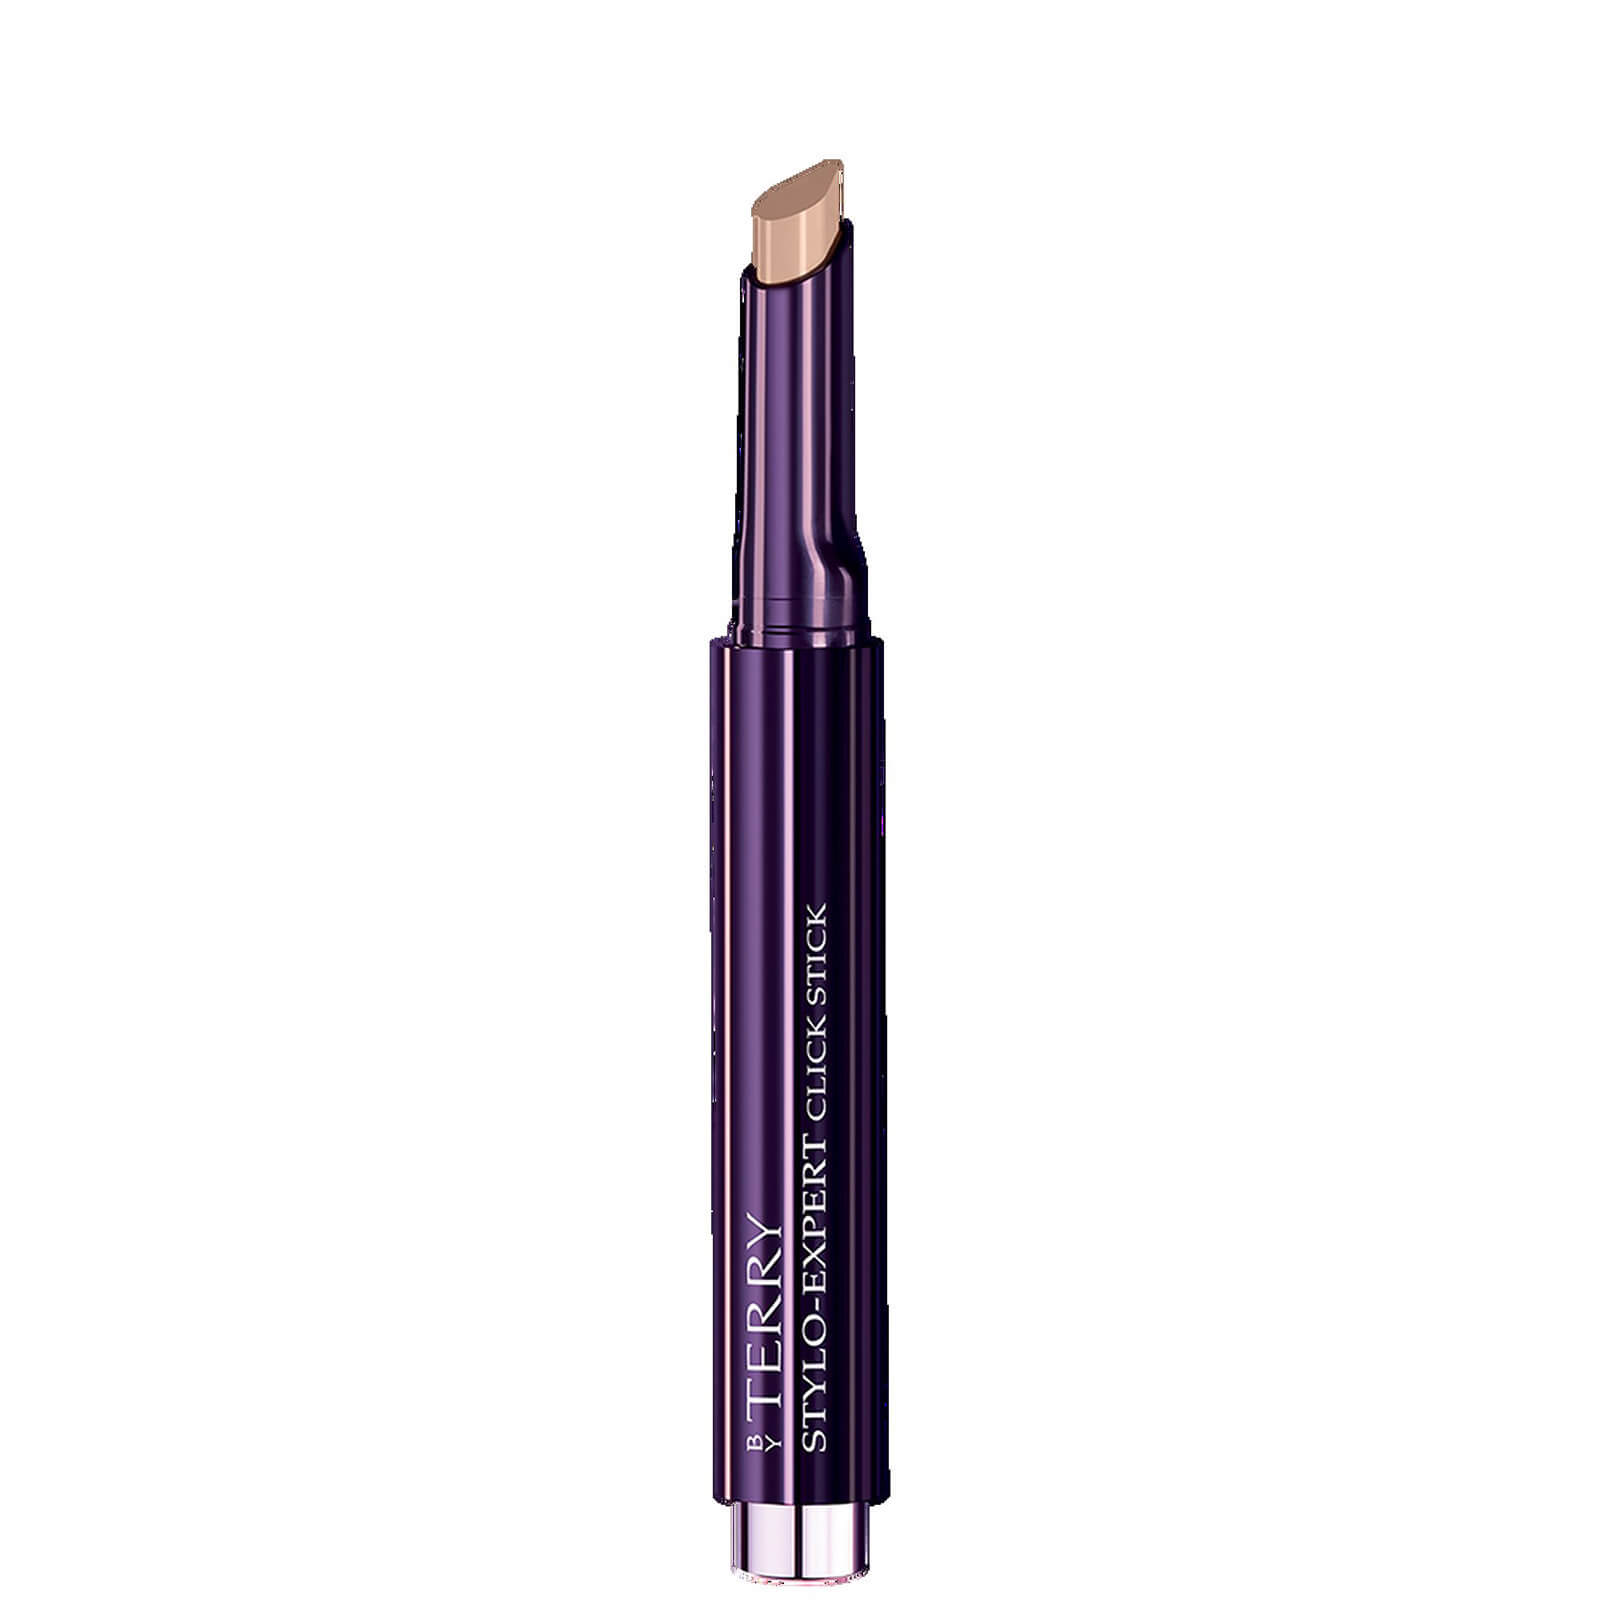 Консилер By Terry Stylo-Expert Click Stick Concealer 1 г (различные оттенки) - No.4 Rosy Beige